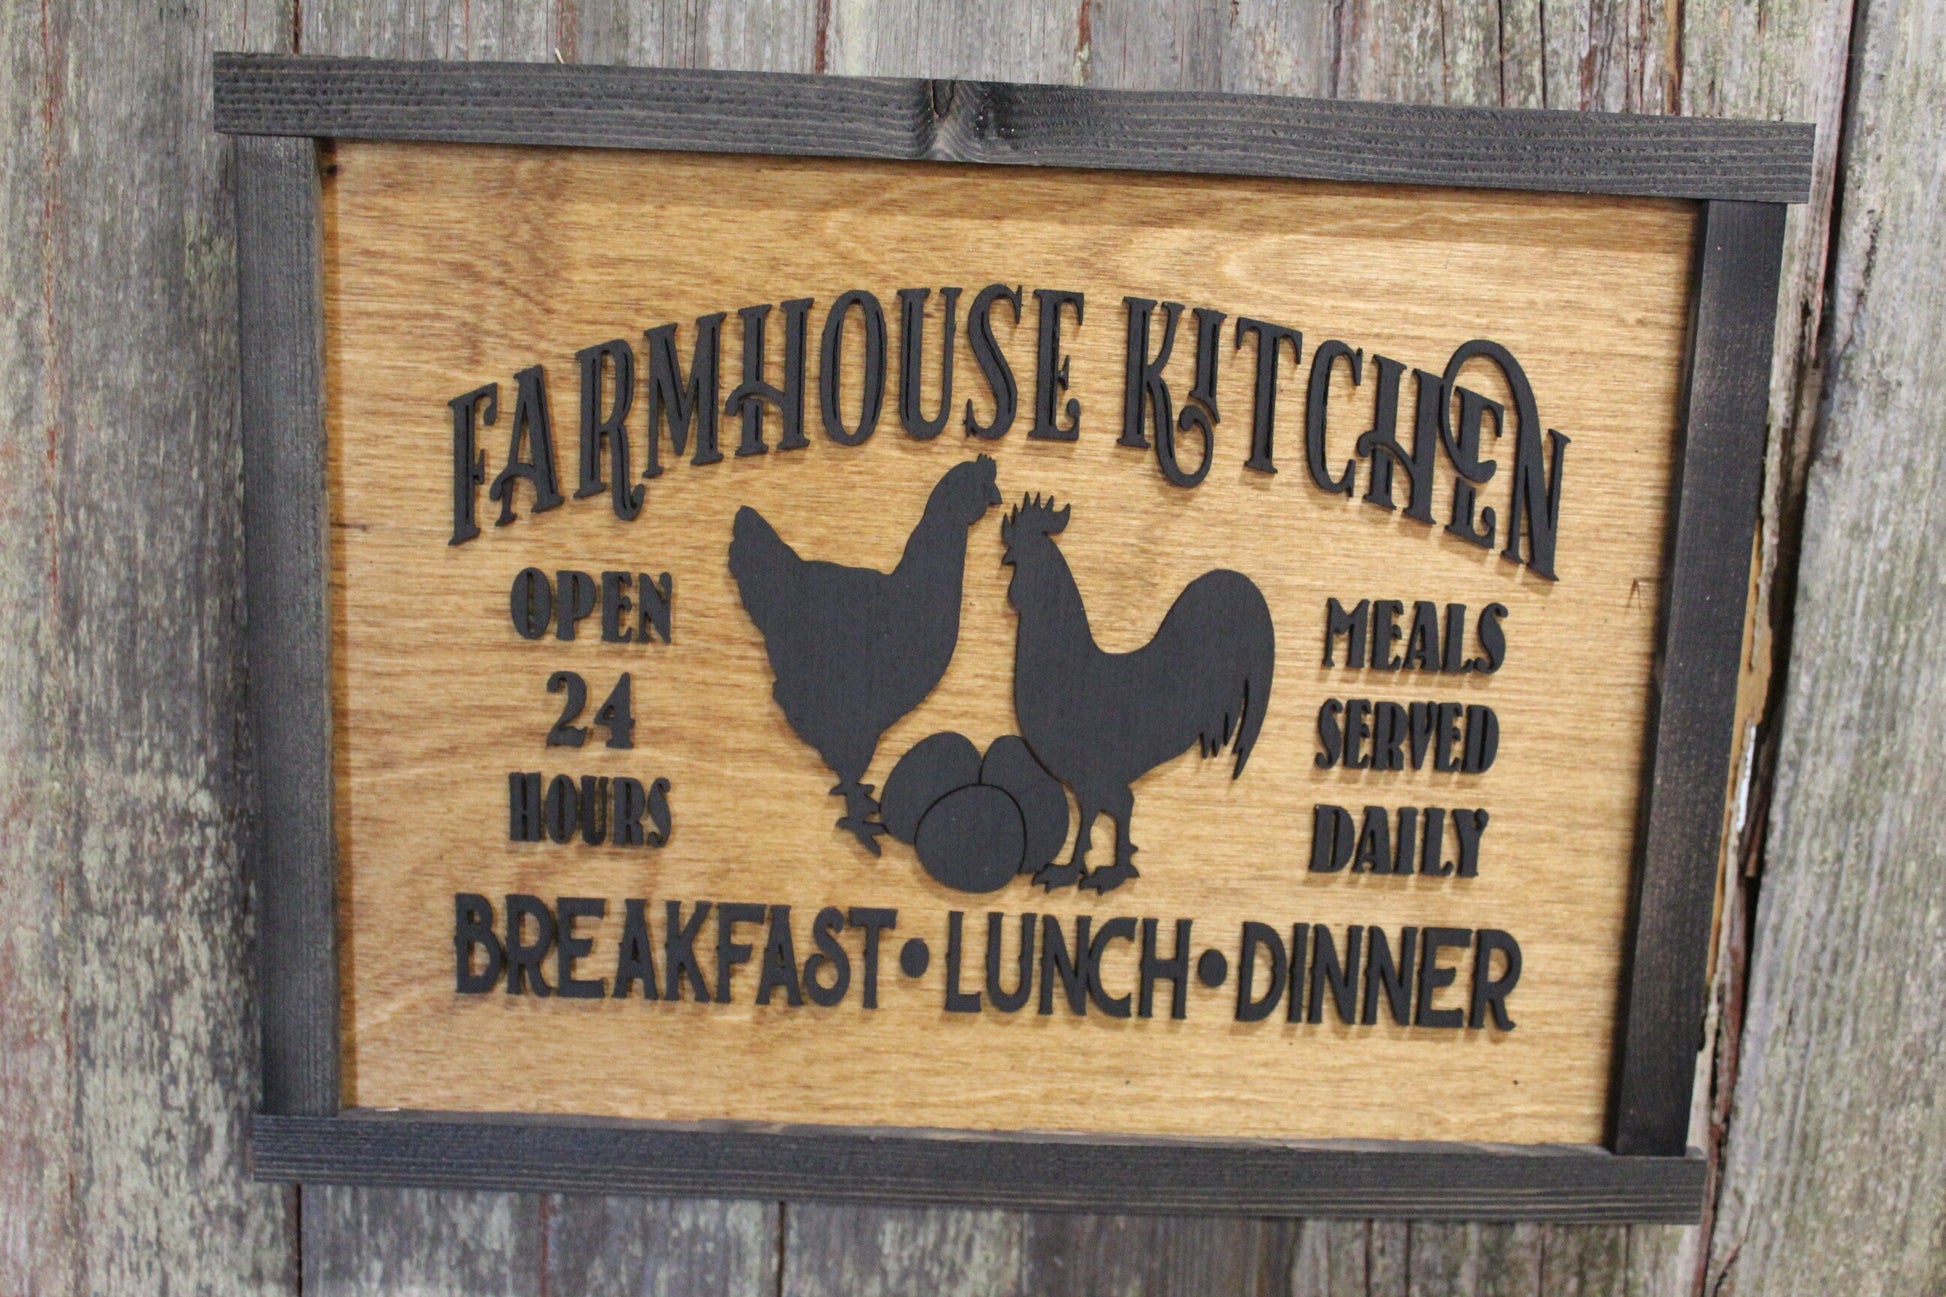 Farmhouse Menu Kitchen Wood Sign Chickens Open 24 Hours Meals Served Daily 3D Raised Text Framed Primitive Cabin Rustic Sign Chick Eggs